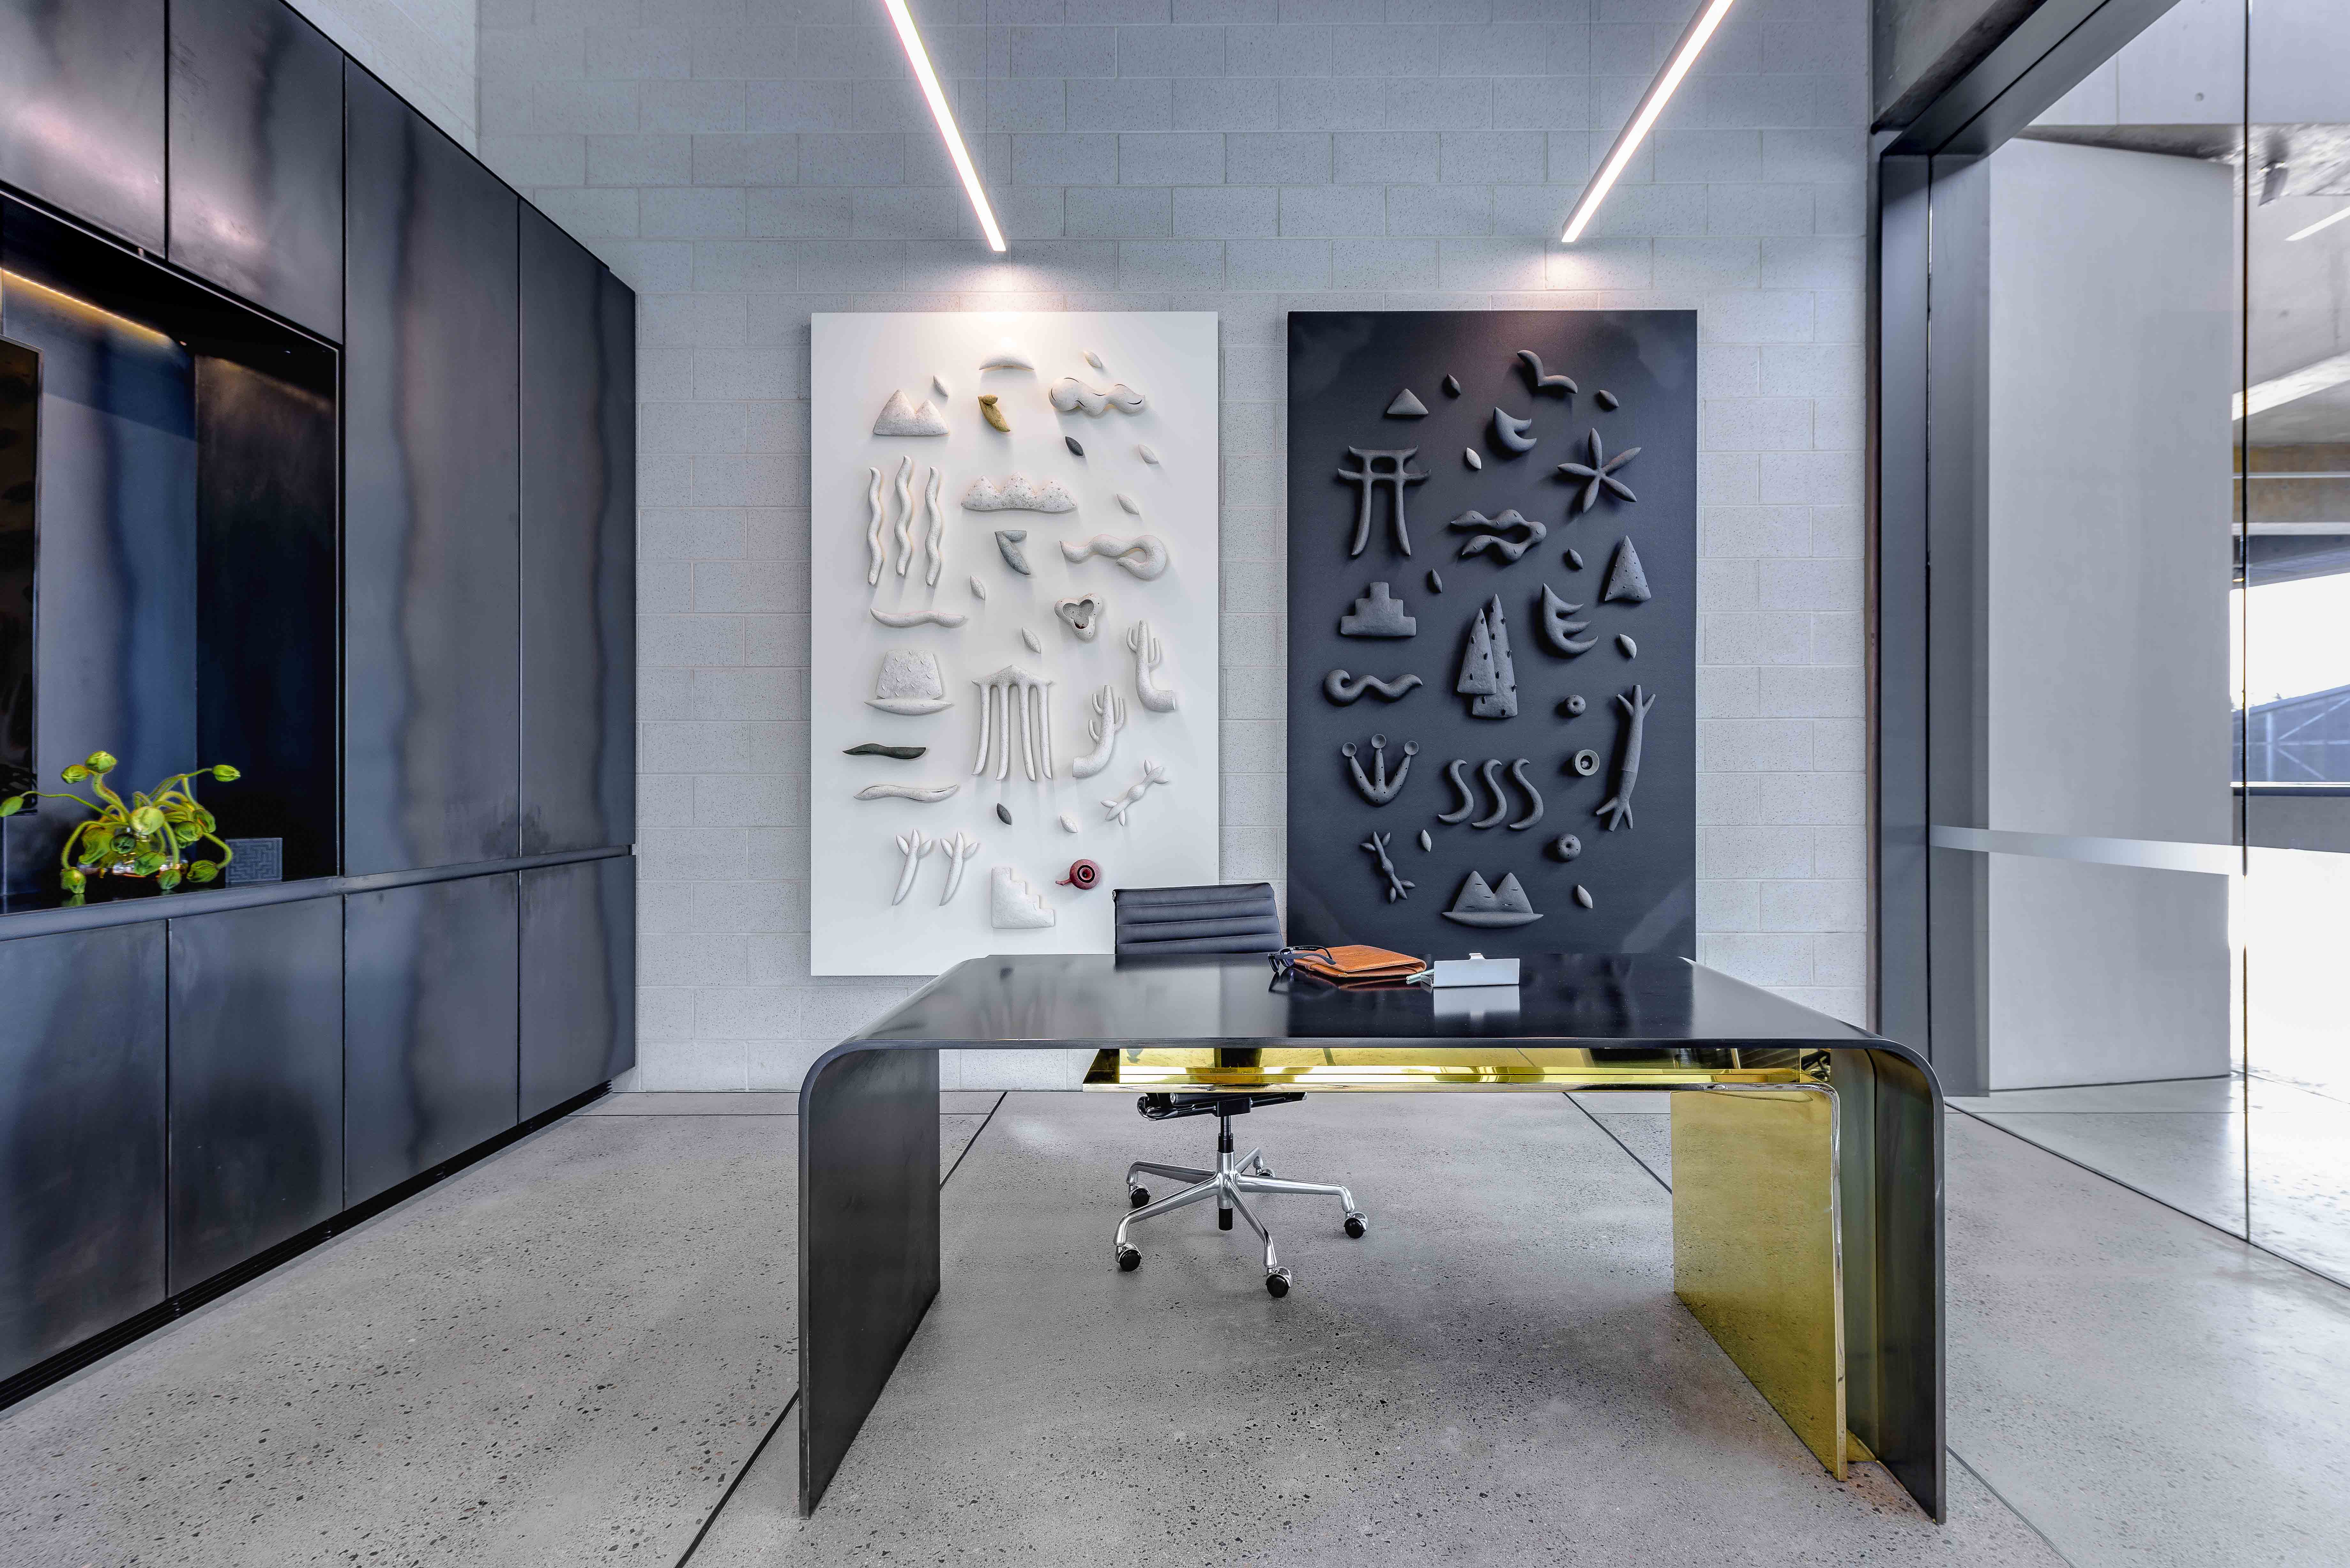 Dangrove Art Storage Facility Interior, Alexandria NSW Australia, designed by Tzannes, built by Infinity Constructions. Photography by The Guthrie Project.